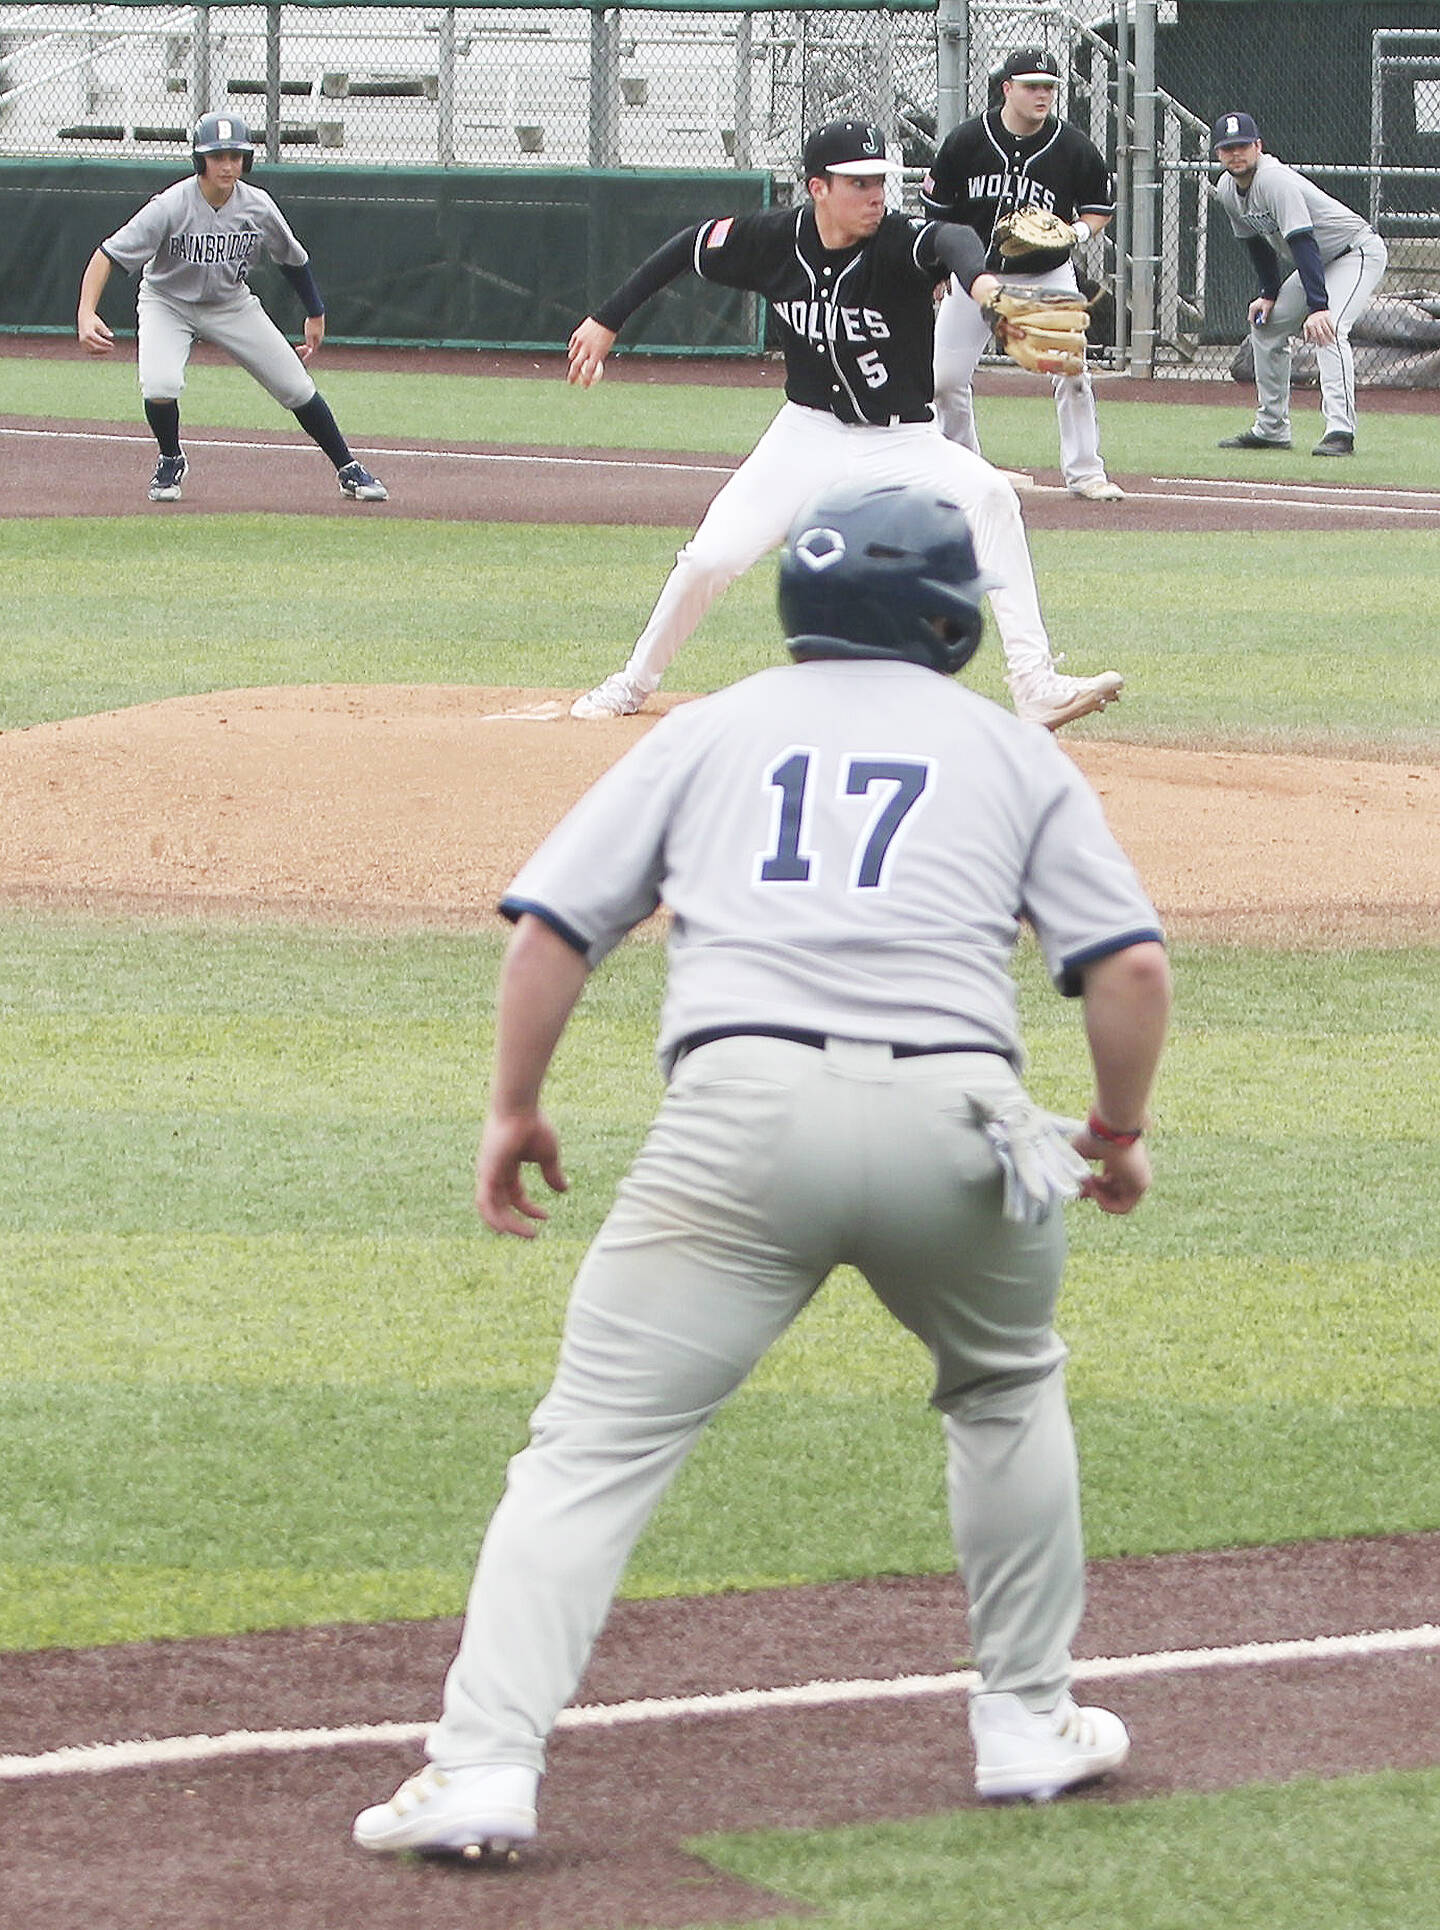 In a first and third situation, Joey Hildebrandt of BHS takes a lead after hitting a double.